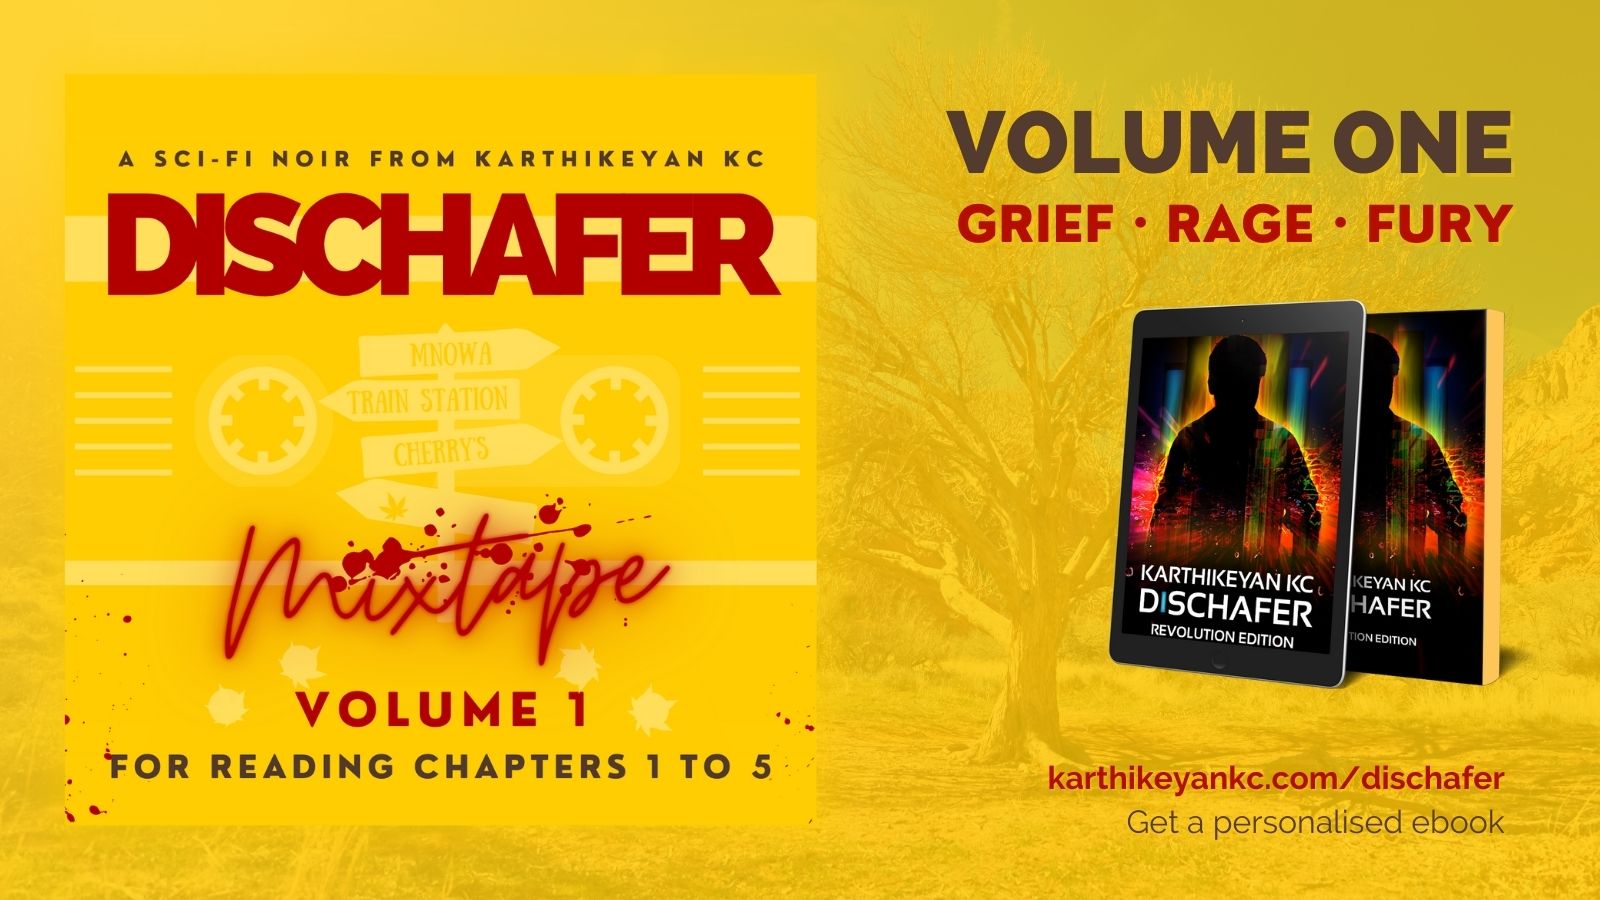 Music compilation for Dischafer - For Chapters 1 to 6.